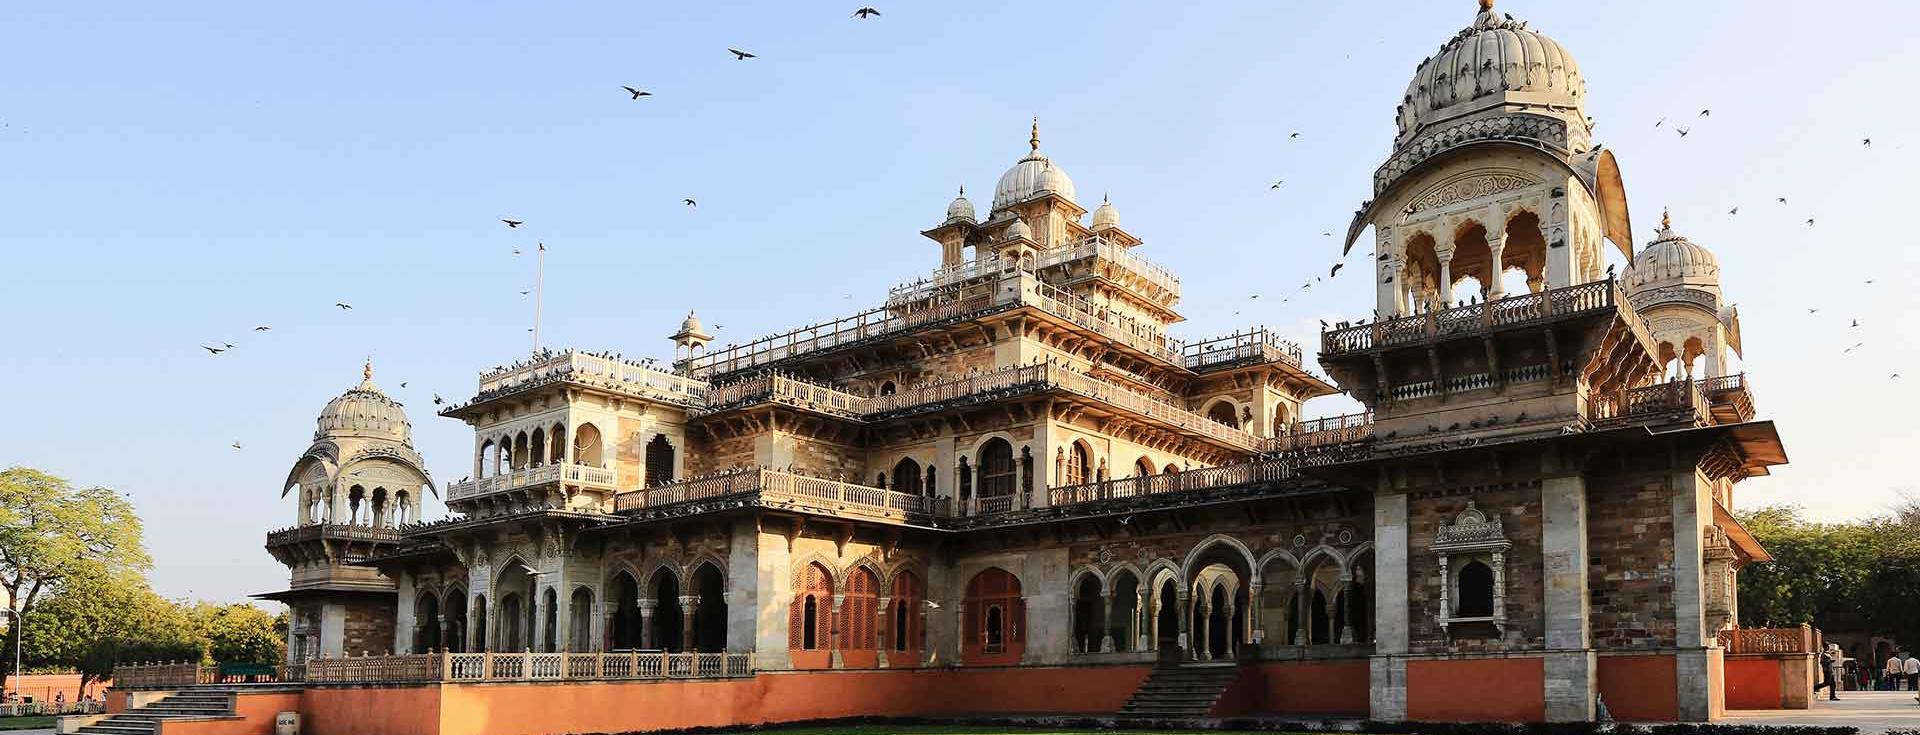 Explore these majestic forts and historical sites around Delhi